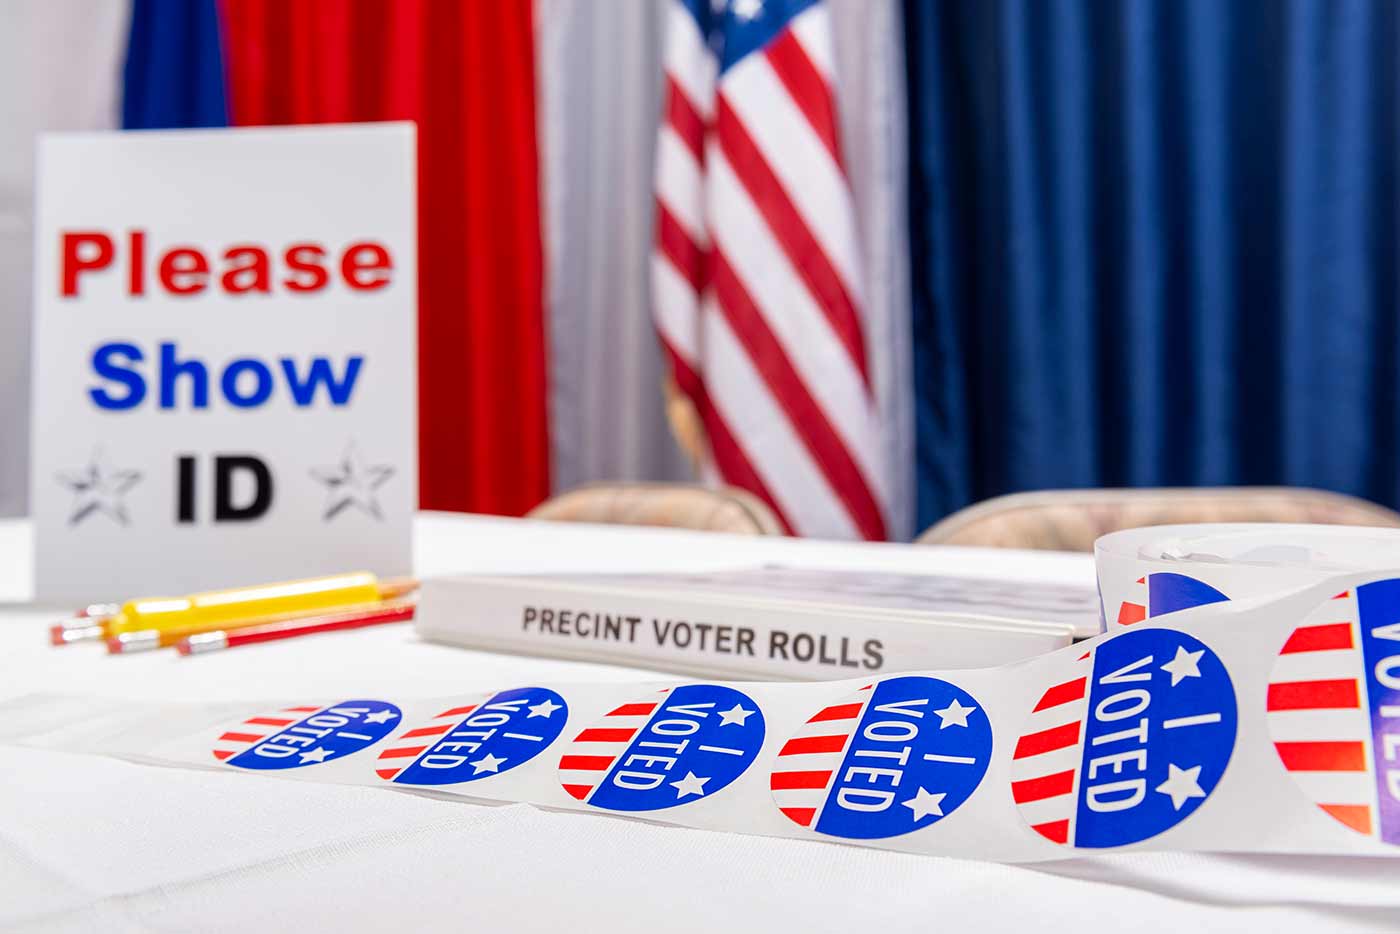 Newswise: Voter ID laws discriminate against racial and ethnic minorities, new study reveals